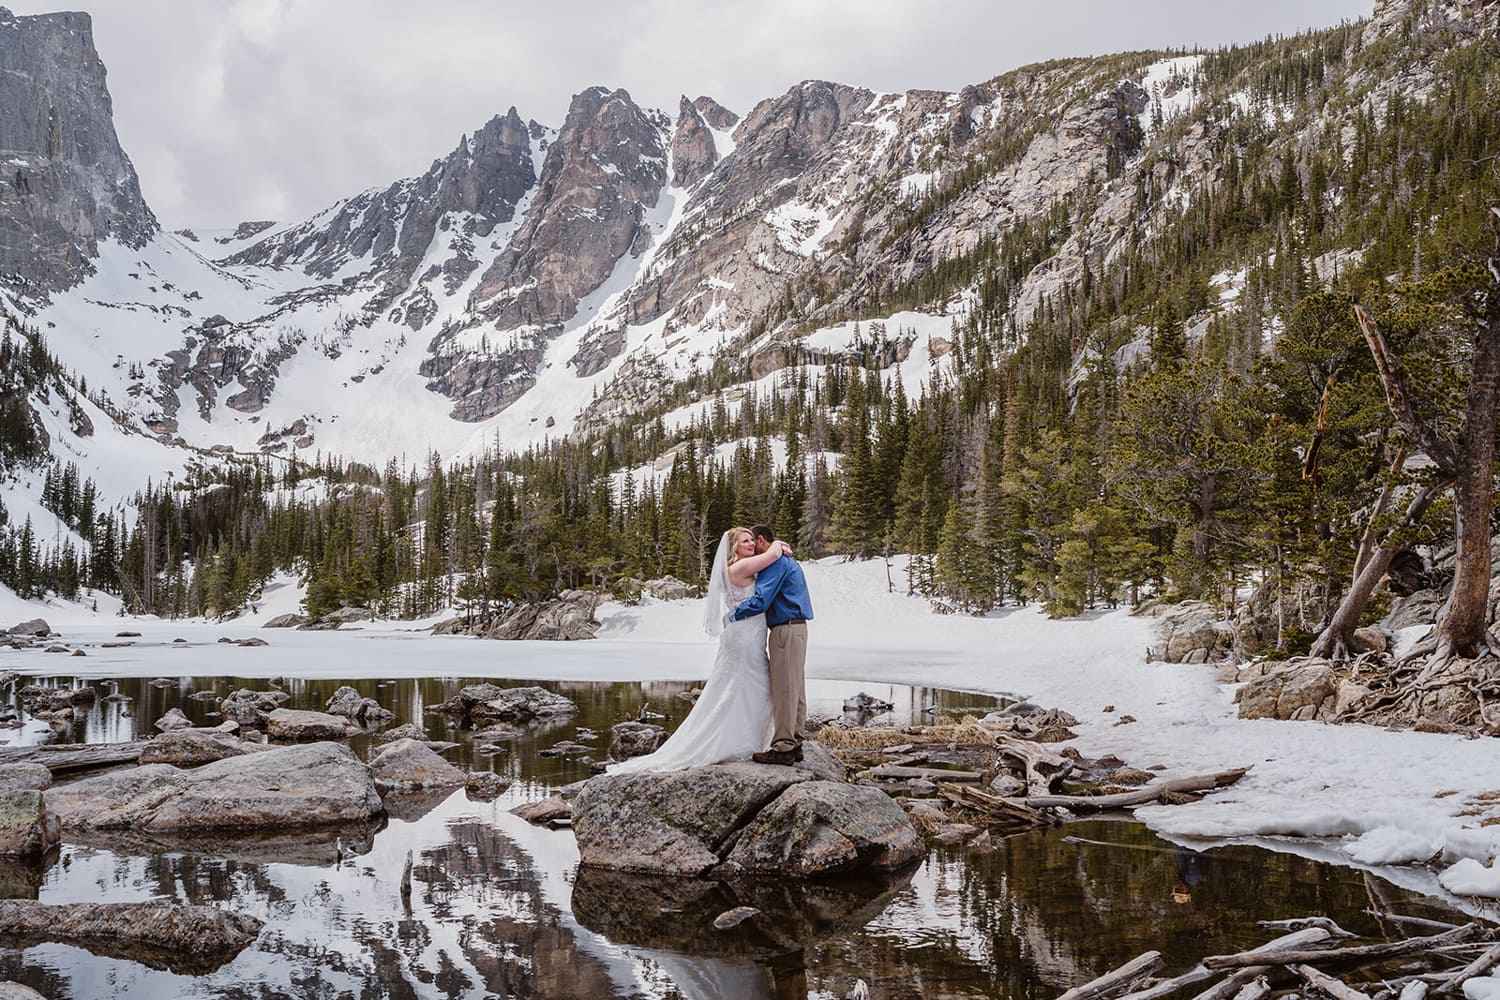 Couple sharing a moment near a lake for their Rocky Mountain National Park elopement.